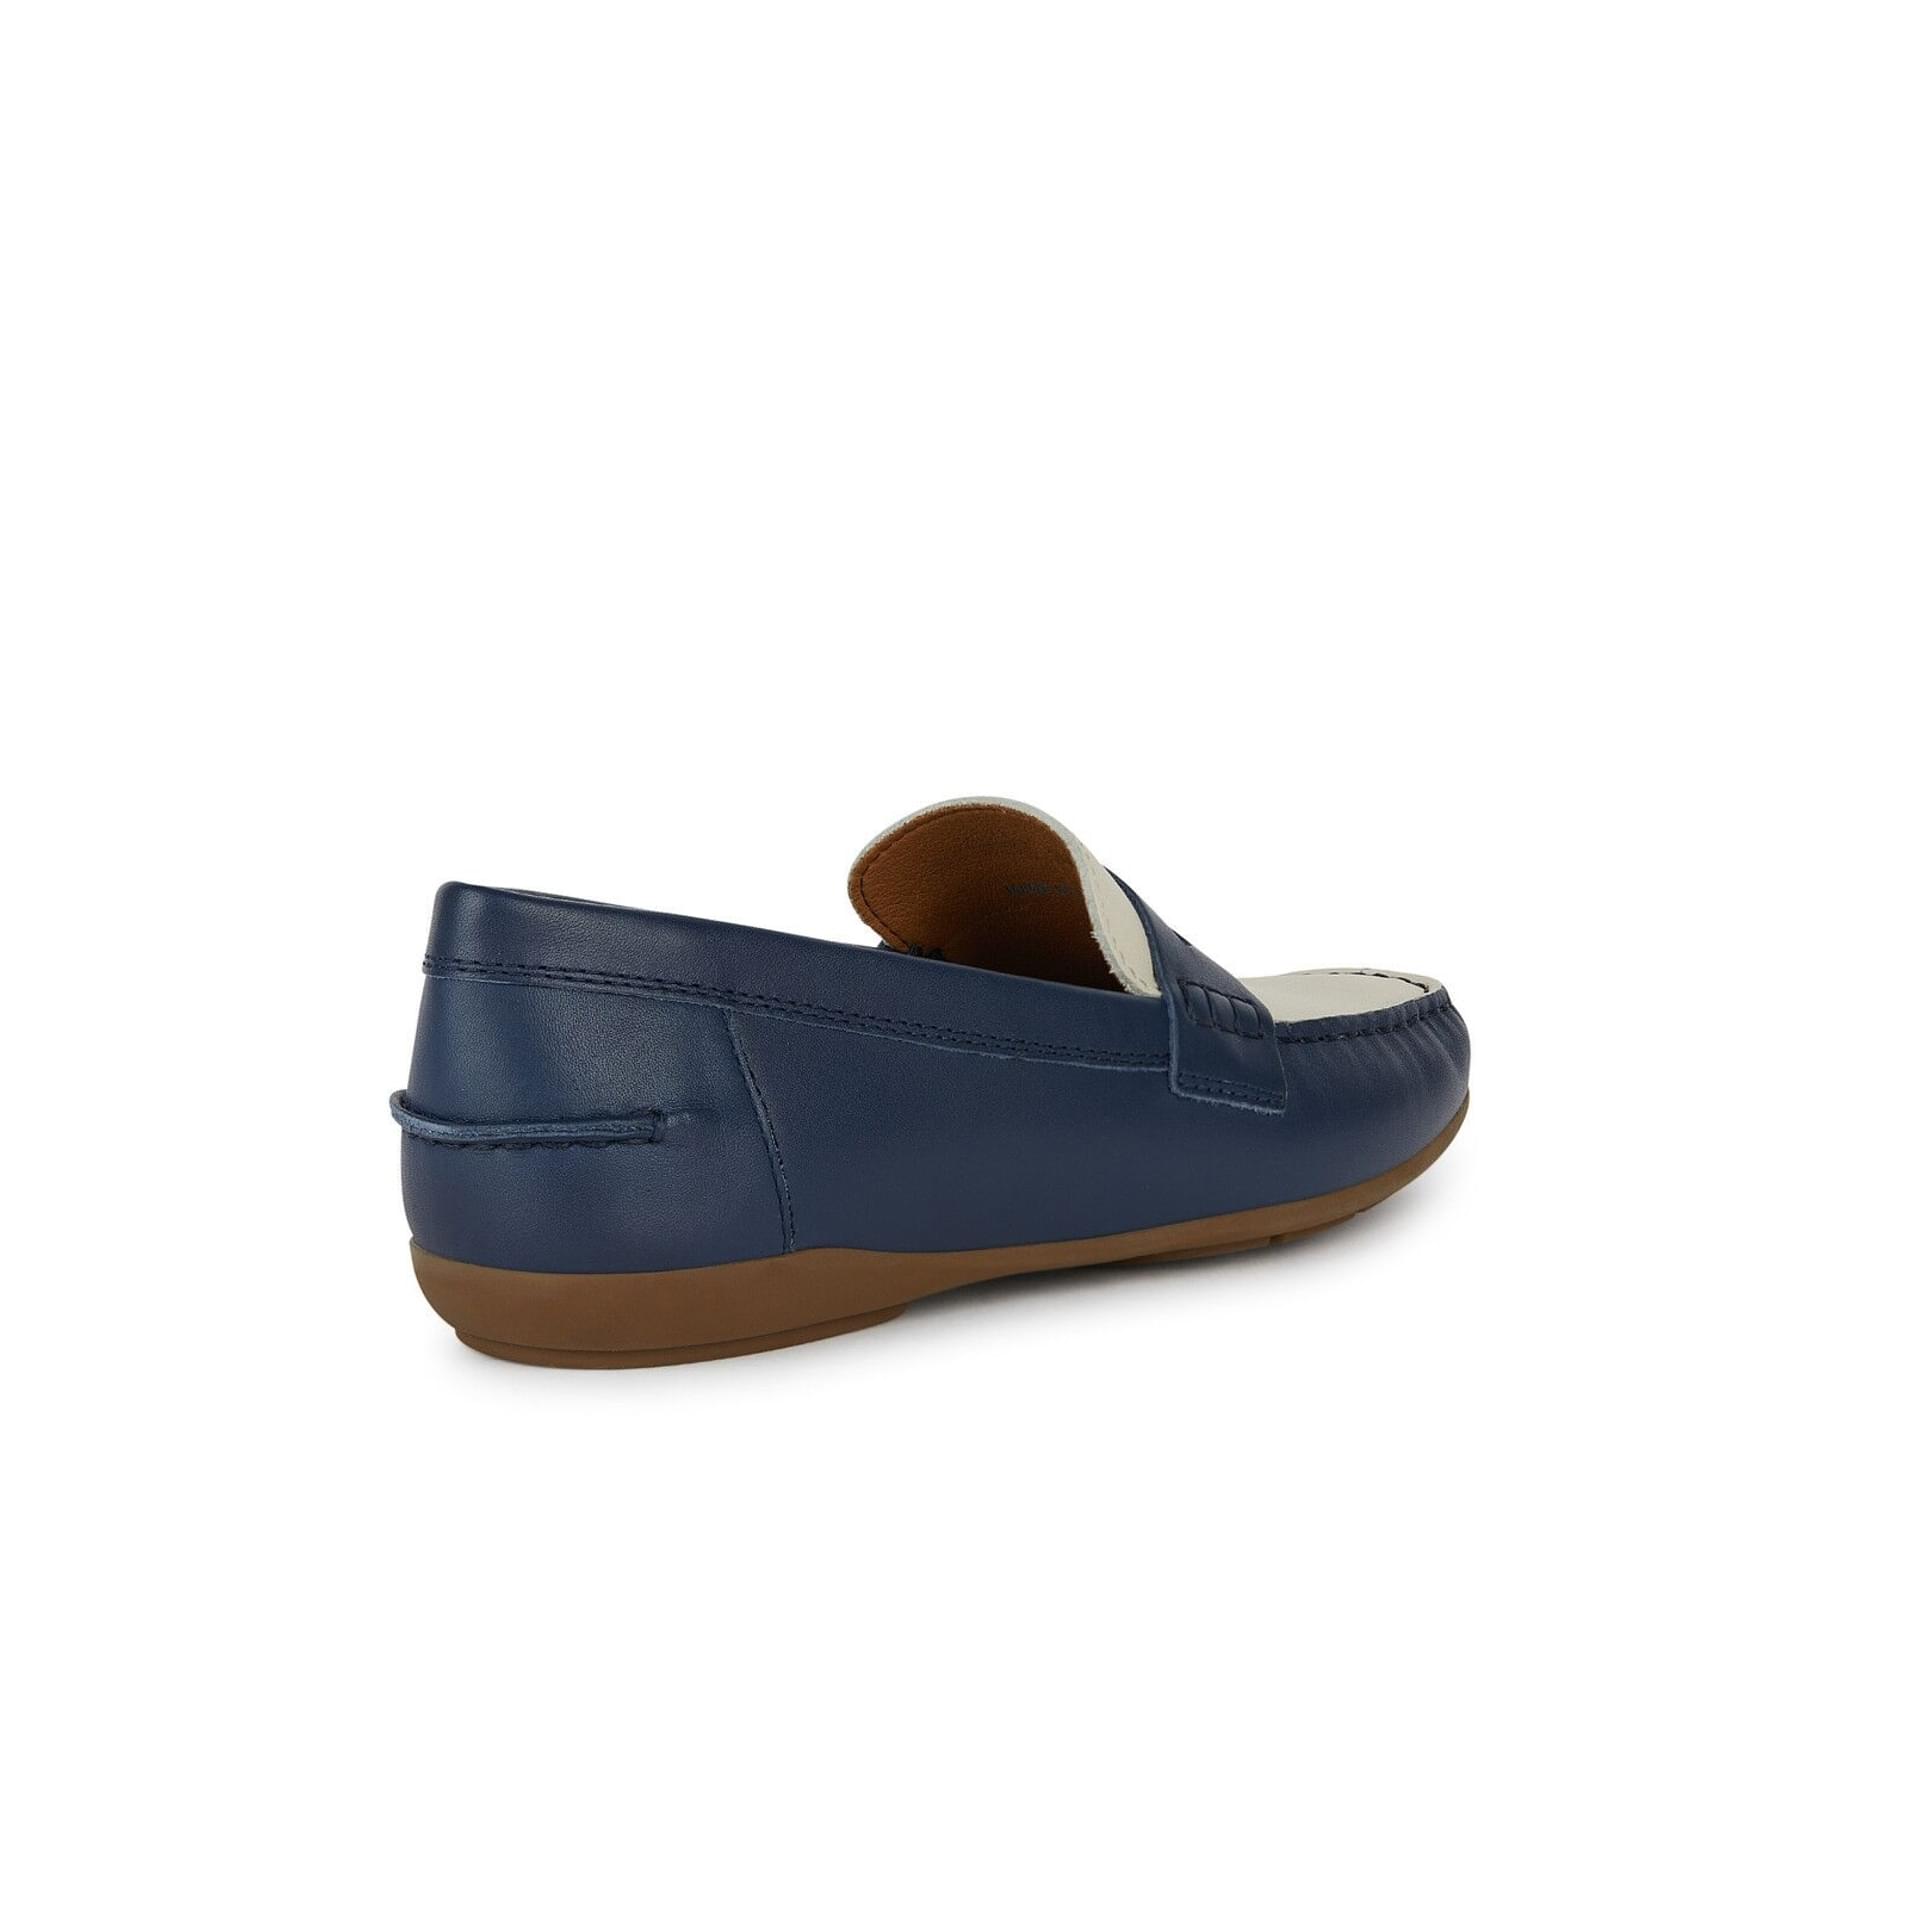 Geox Annytah Moc Moccassins D25BMA_00043 in Navy/Light Sand